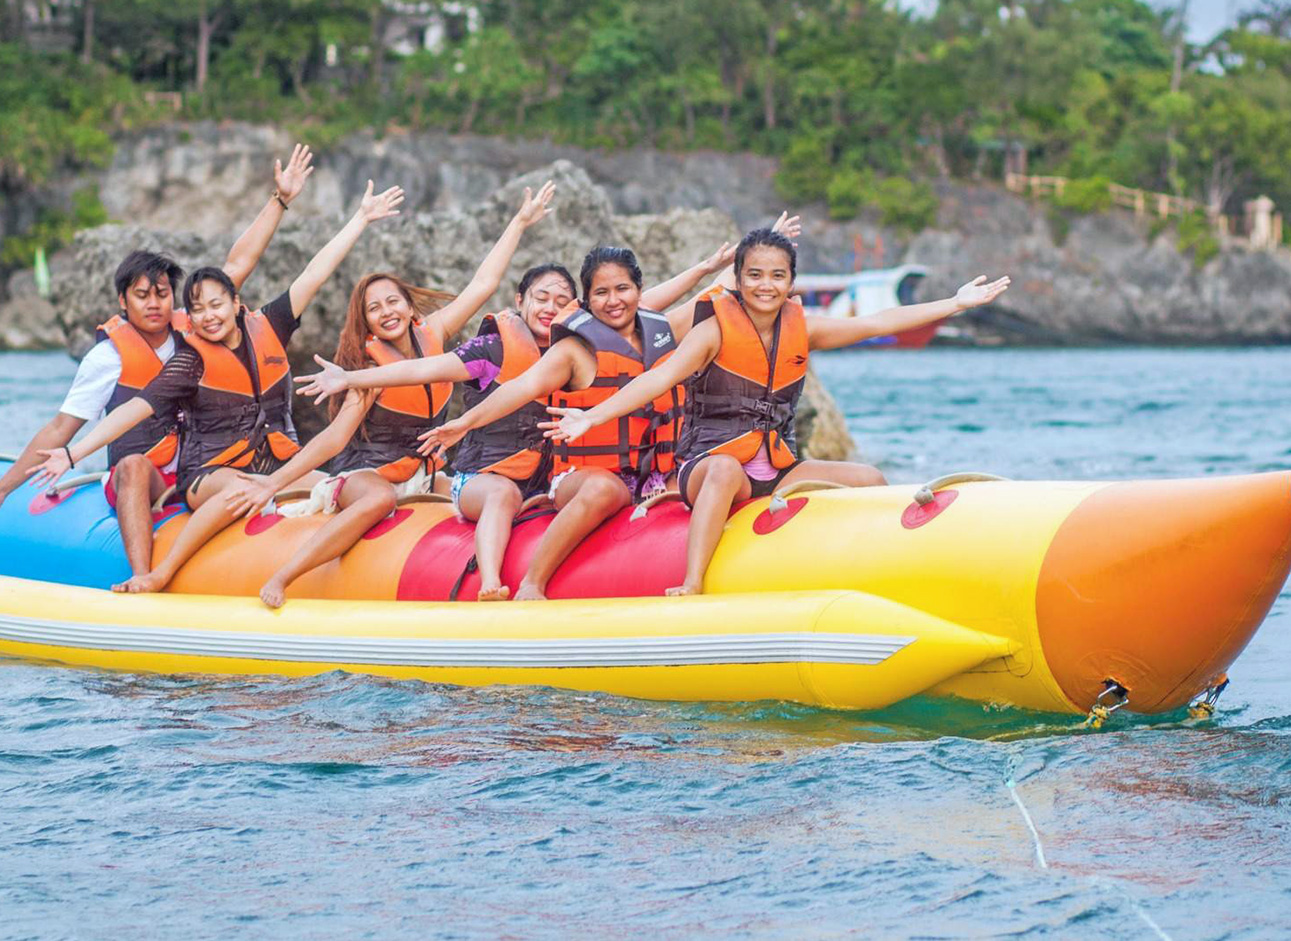 Banana Boat Ride - Enjoy a fun-filled adventure on a banana boat in the water